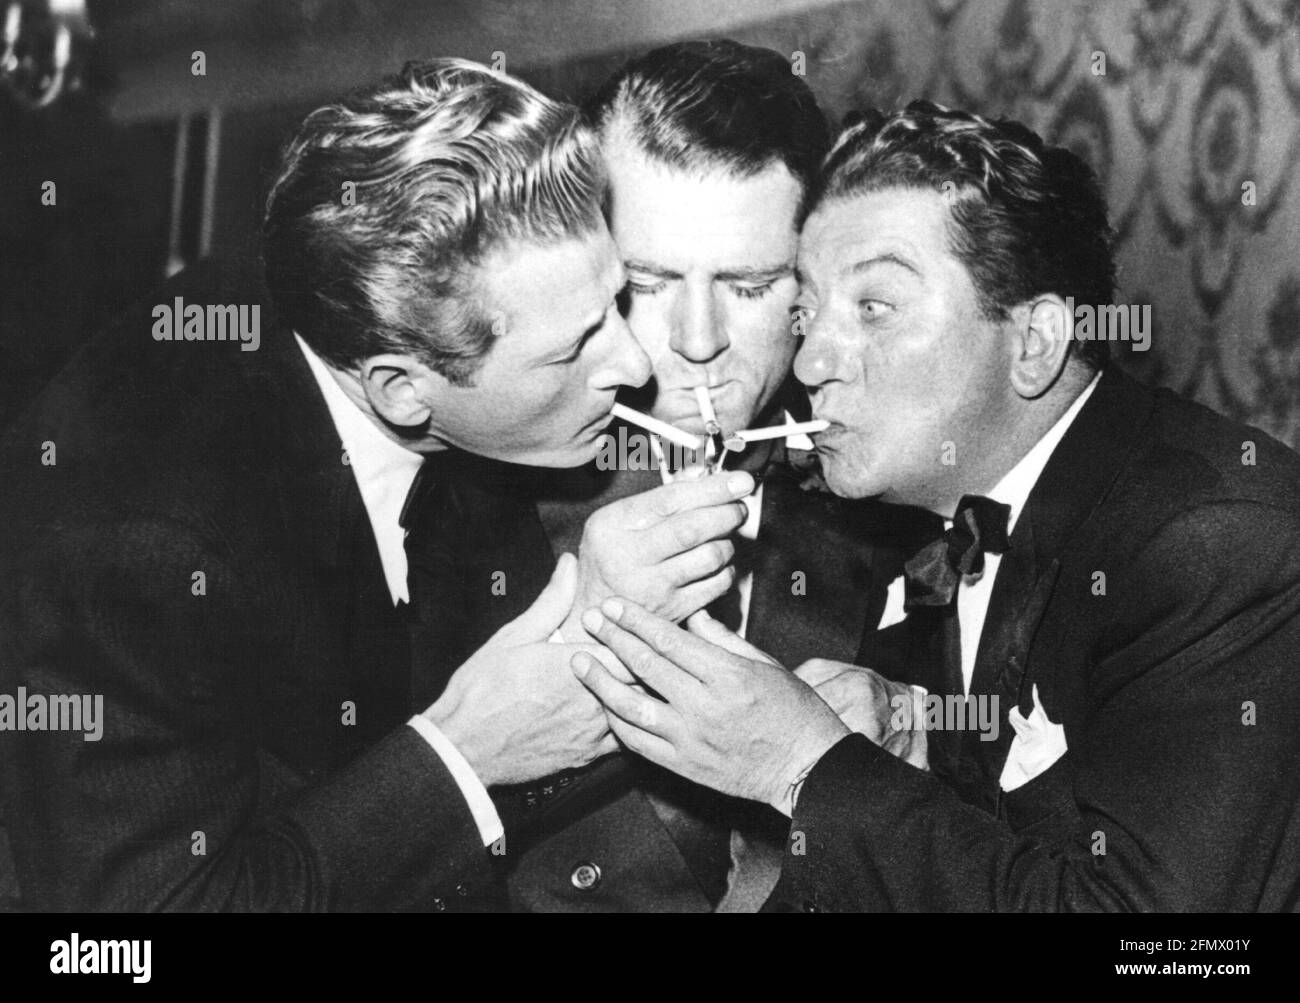 Olivier, Laurence Sir, 22.5.1907 - 11.7.1989, britischer Schauspieler, mit Danny Kaye, (1913-1987), SID FIELD, ADDITIONAL-RIGHTS-CLEARANCE-INFO-NOT-AVAILABLE Stockfoto